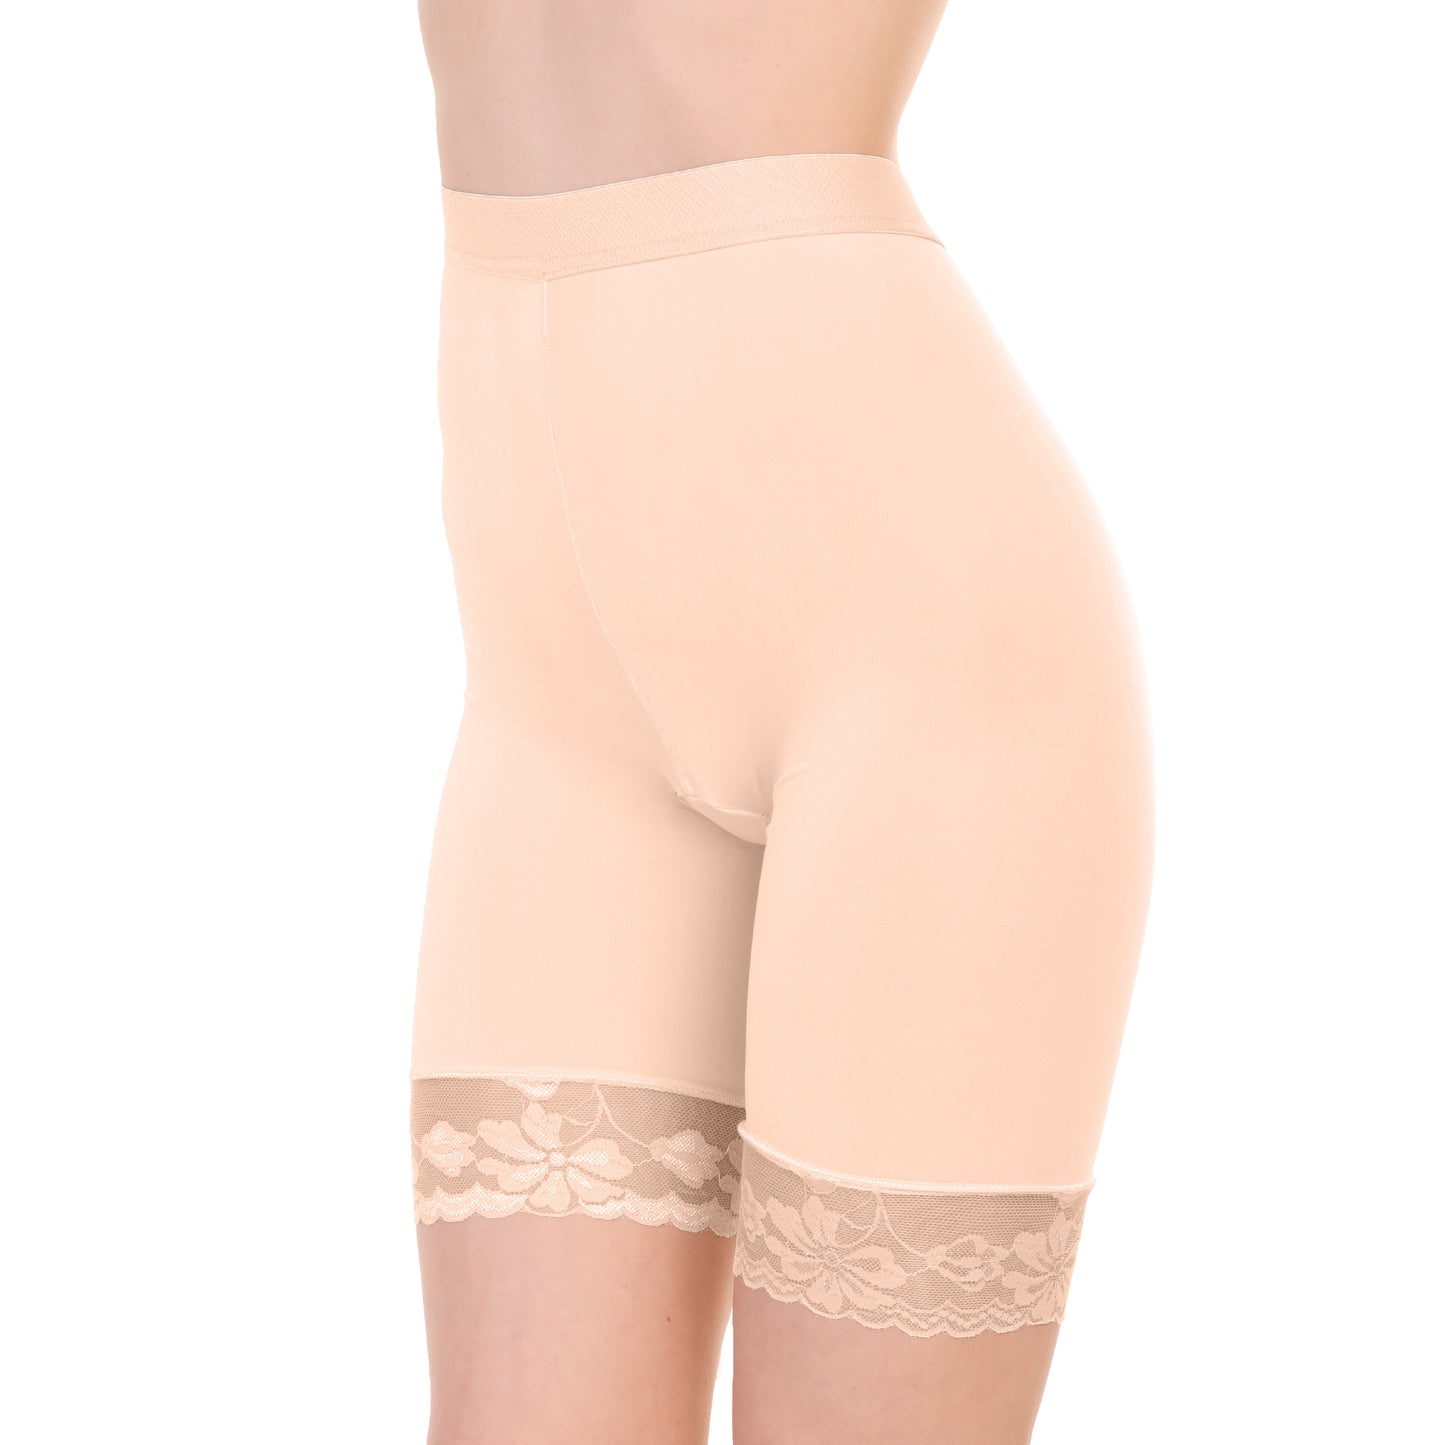 Angelina Satin High-Waist Safety Underpants with Lace Accent (12-Pack), #4904